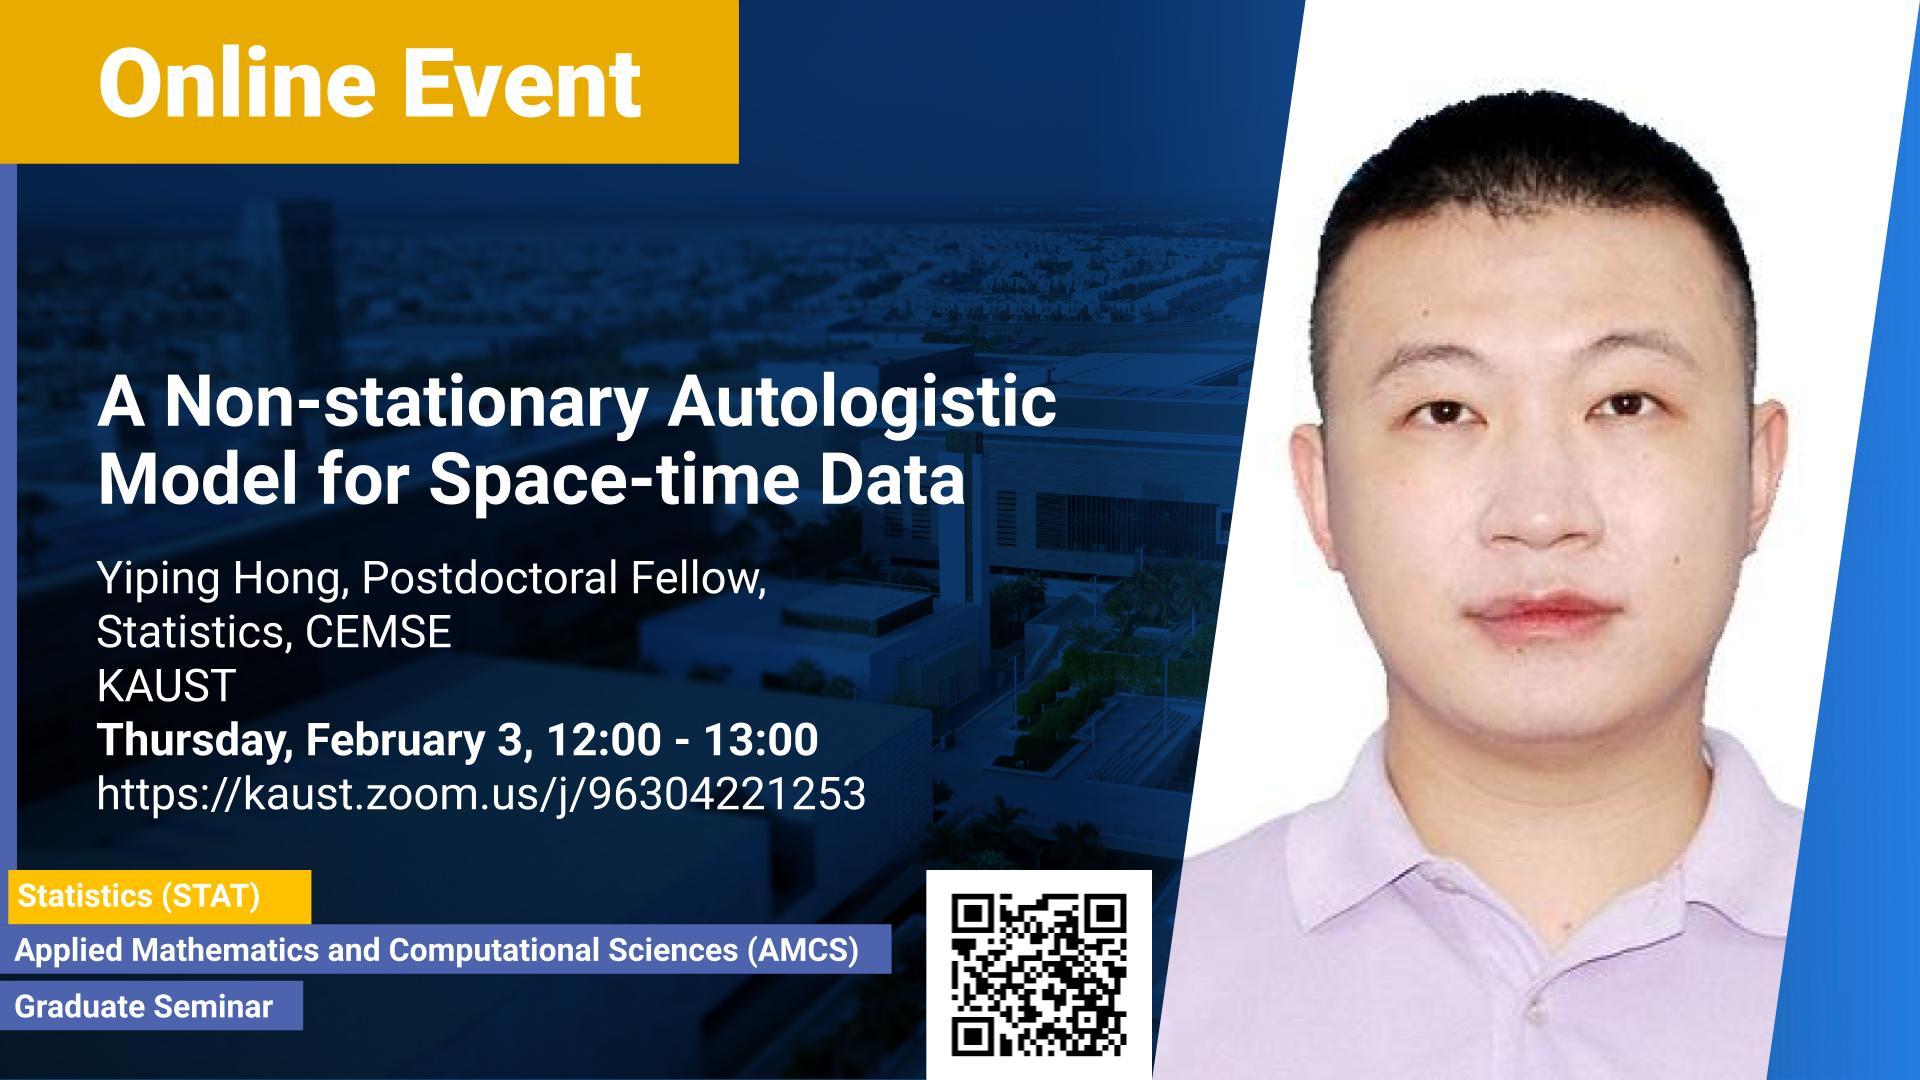 KAUST CEMSE AMCS STAT Graduate Seminar Yiping Hong A Non-stationary Autologistic Model for Space-time Data